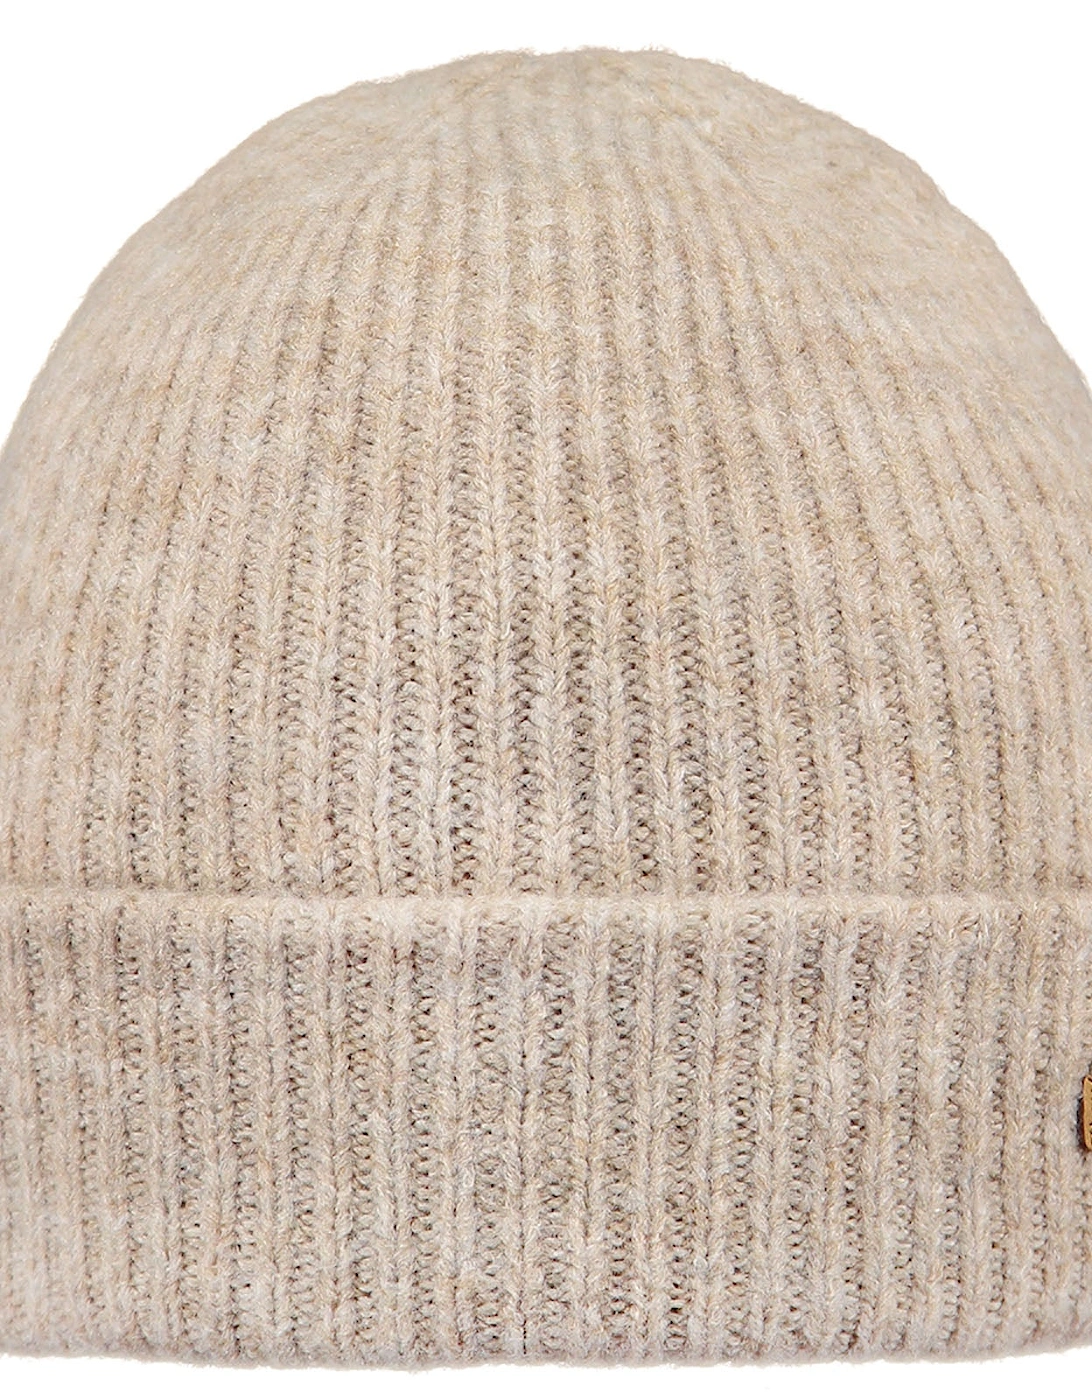 Womens Witzia Stretchy Ribbed Knit Knitted Beanie Hat